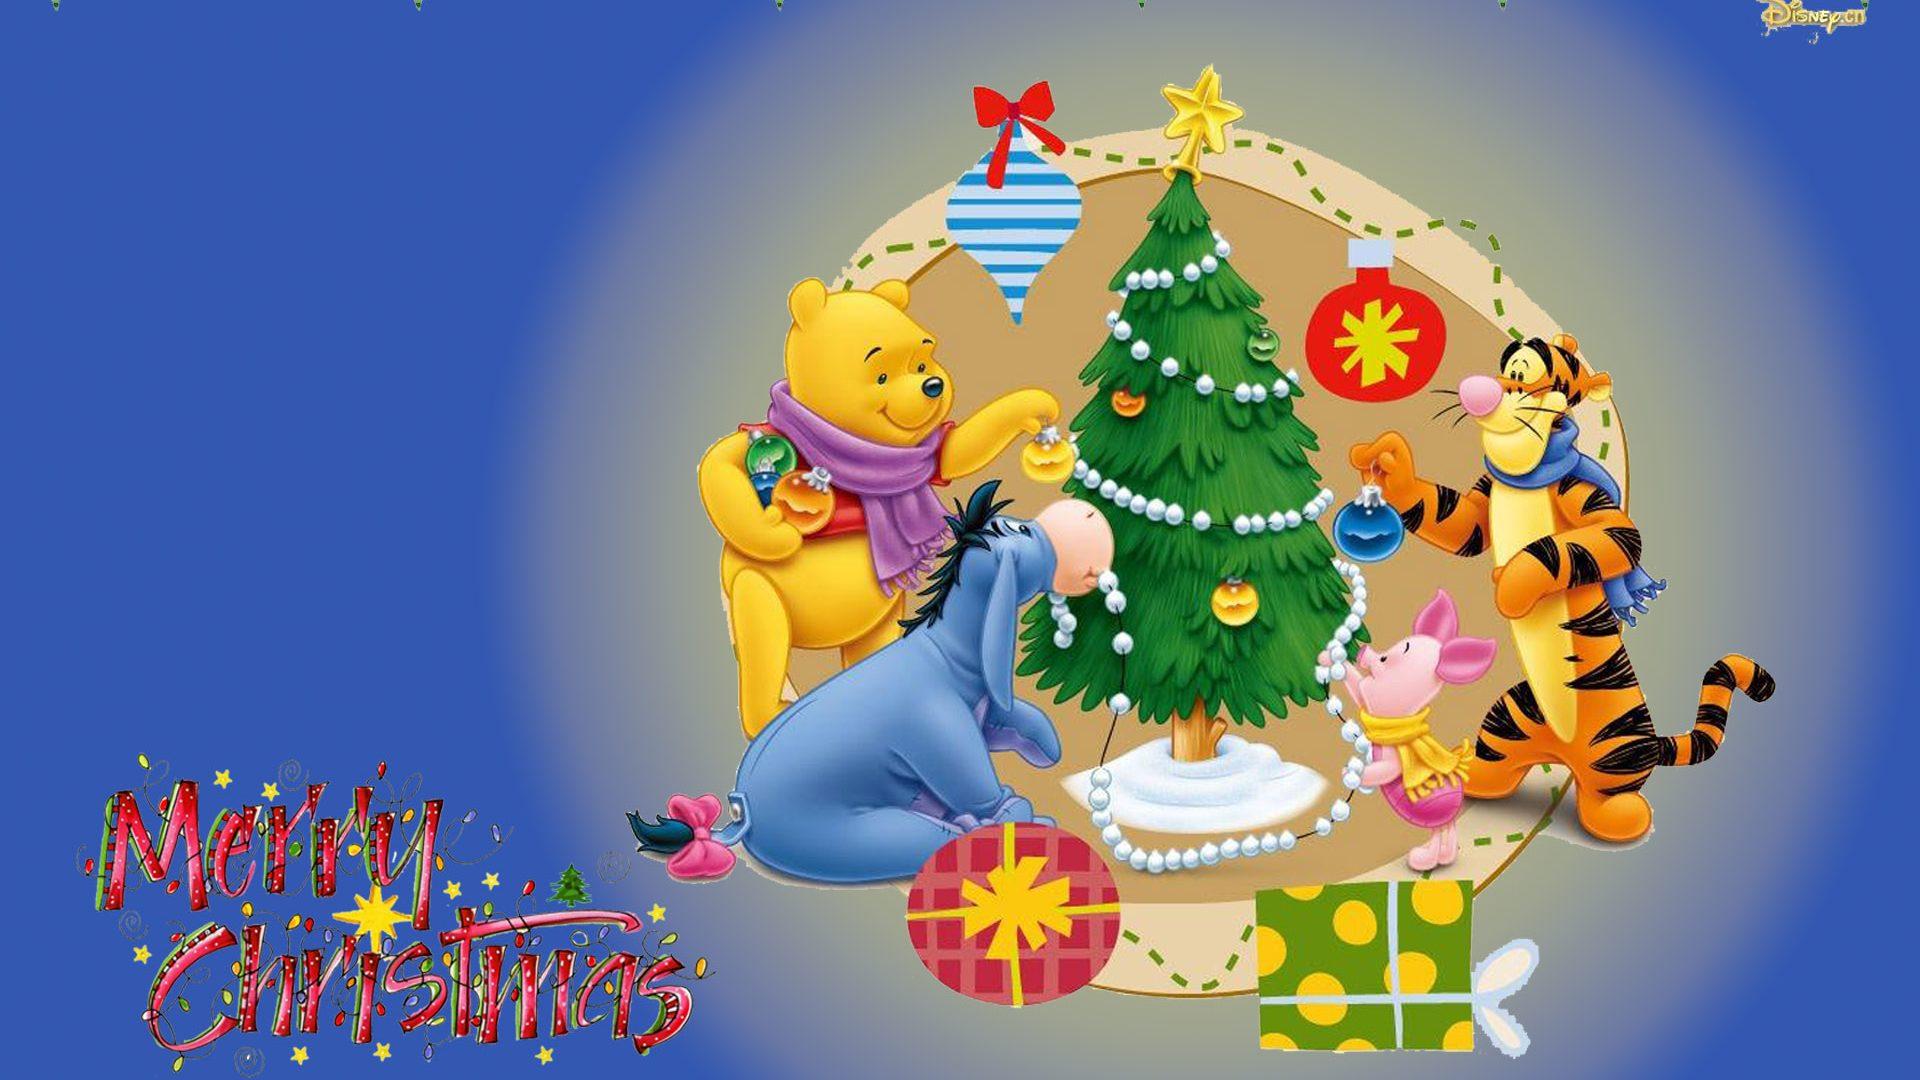 Merry Christmas Winnie The Pooh Decorating The Christmas